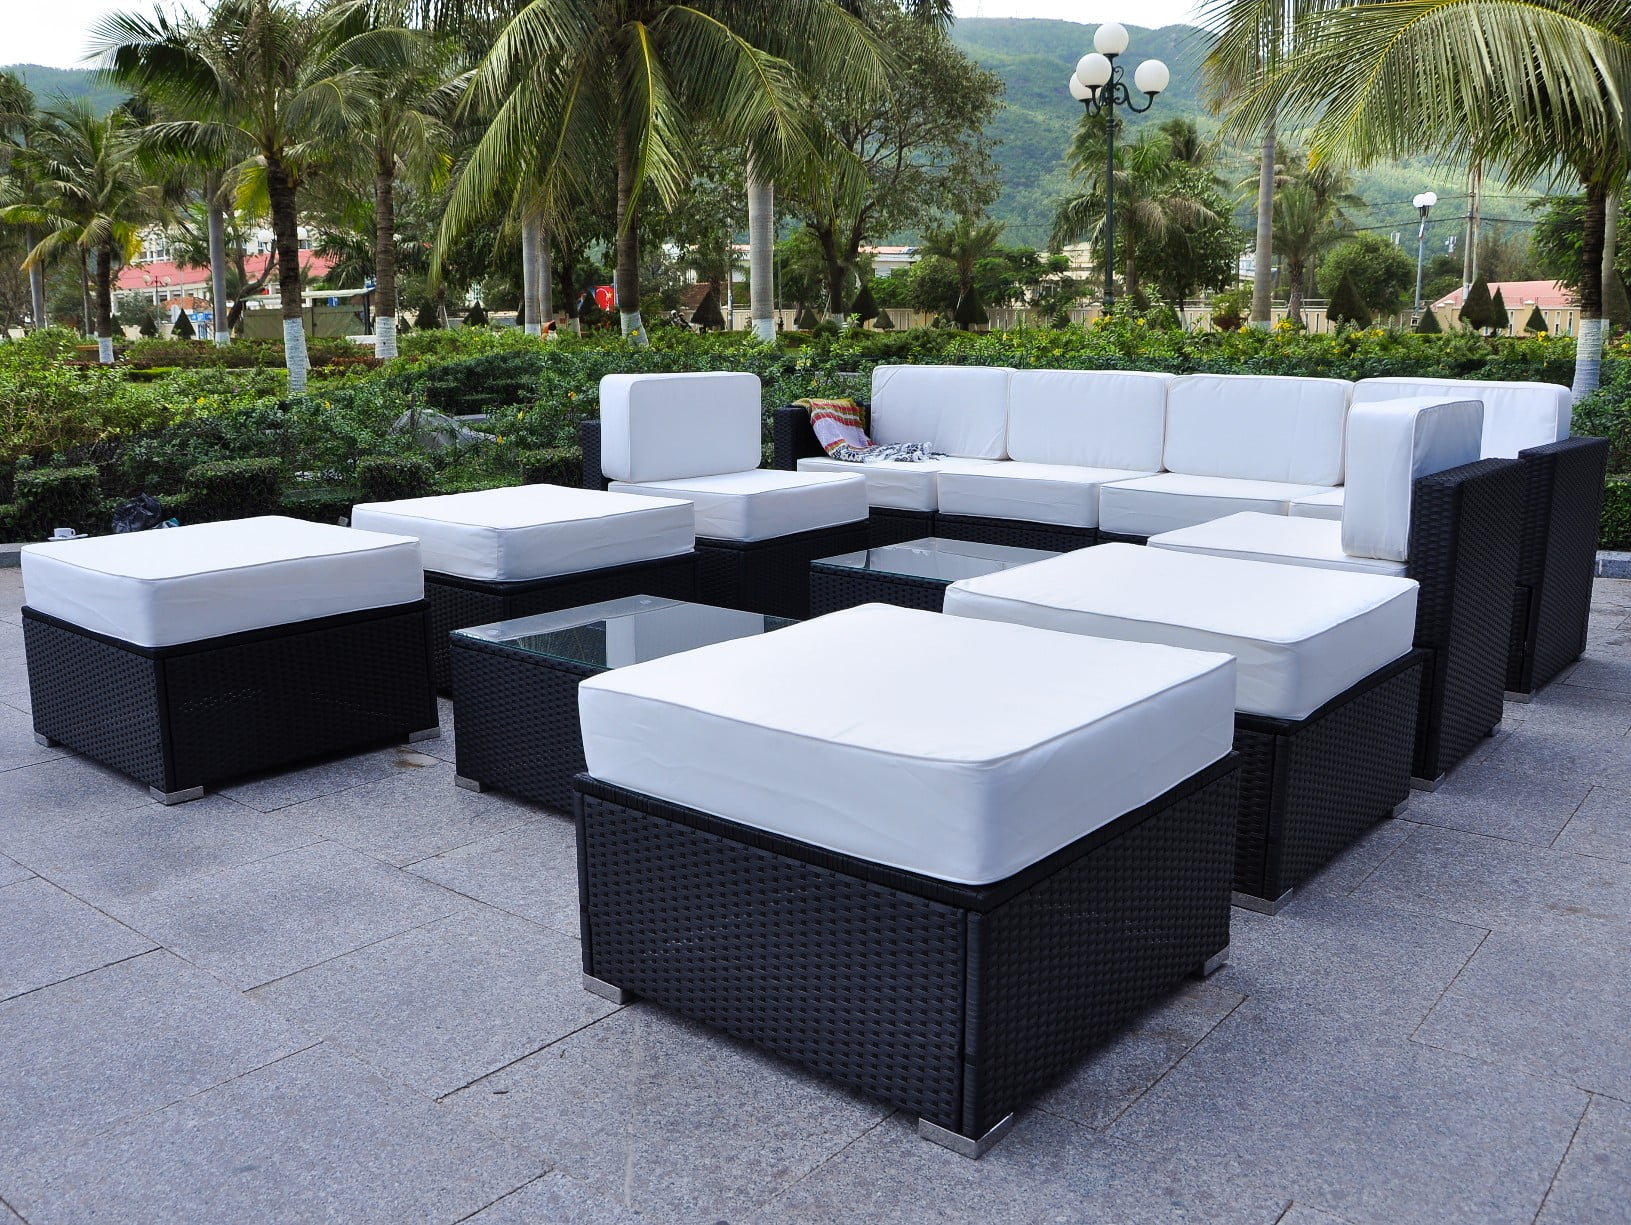 6082 Blue Mcombo Outdoor Wicker Rattan Sofa Chair Sectional Furniture Luxury Large Size Patio Chair with 6 Inch Cushions